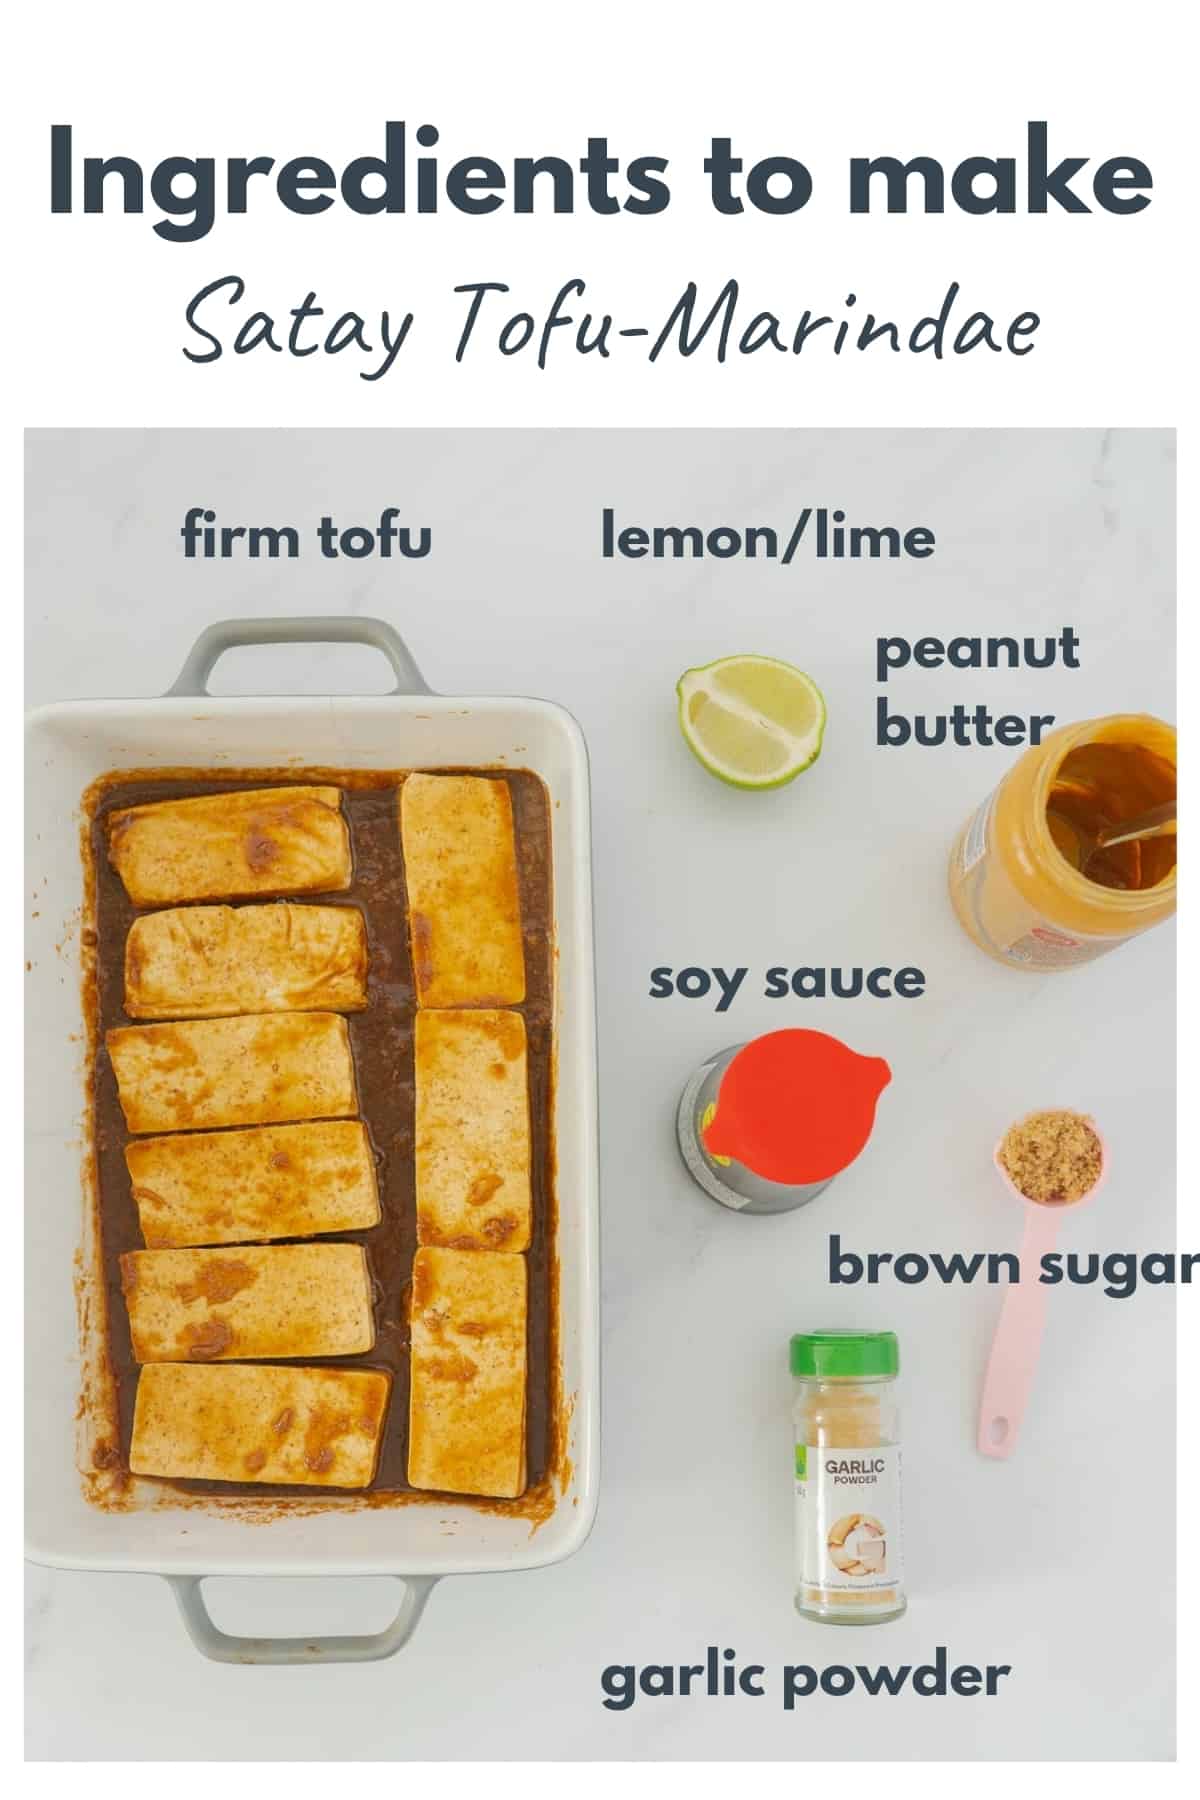 Ingredients to make a satay marinade for tofu laid out on a bench top with text overlay.